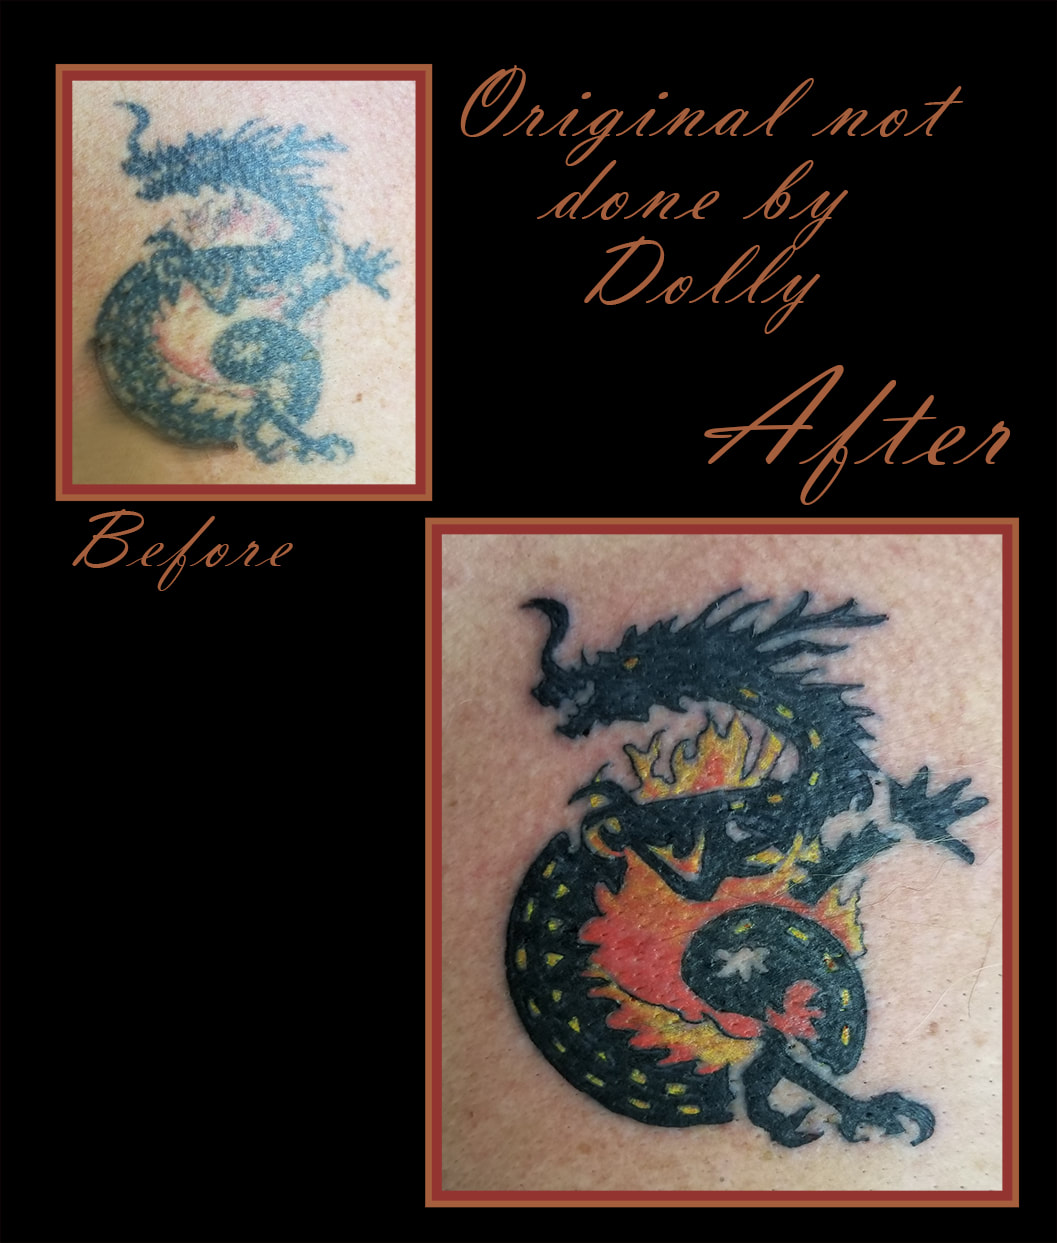 refresh rejuvenation cover up tattoo old faded redo black yellow orange simple traditional kamloops dolly's skin art